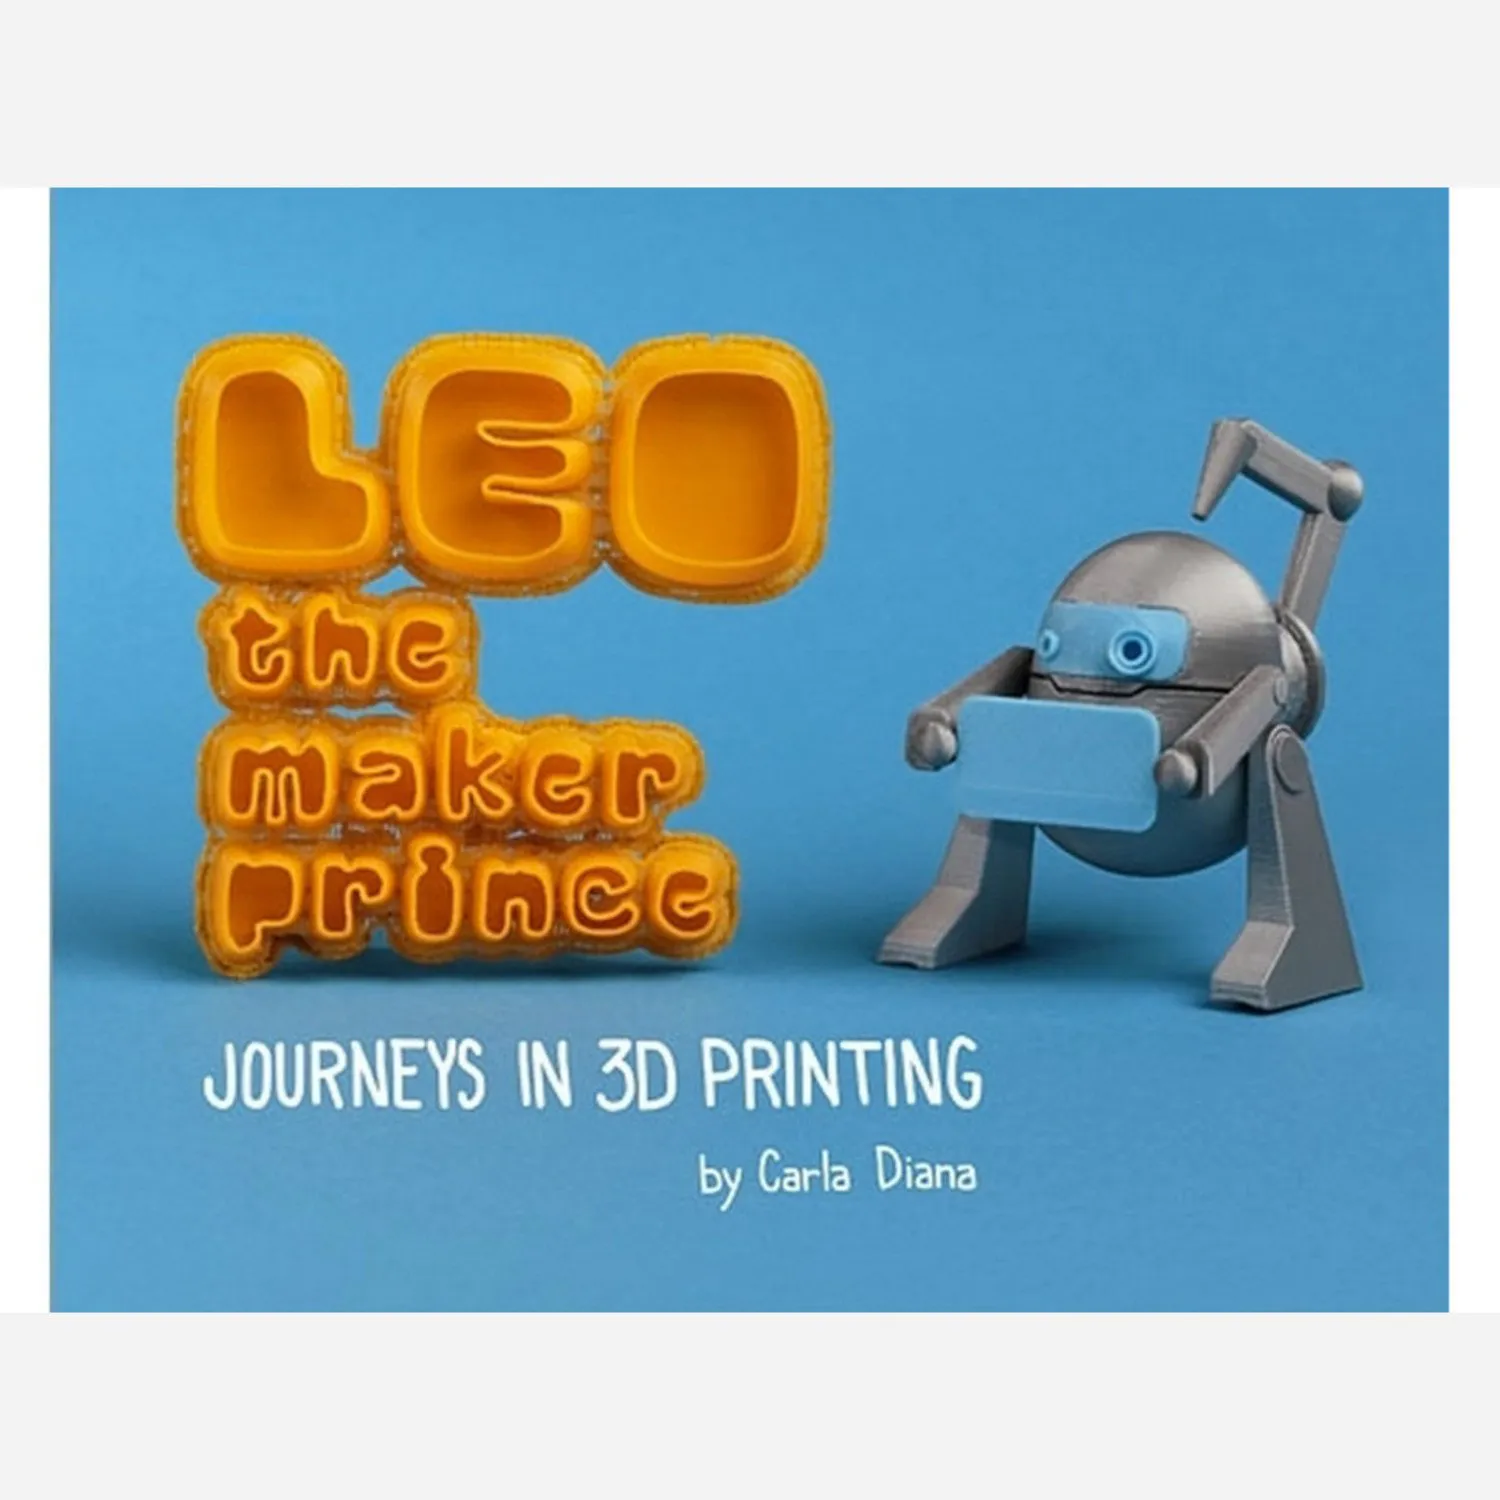 Photo of LEO the Maker Prince - Journeys in 3D Printing by Carla Diana